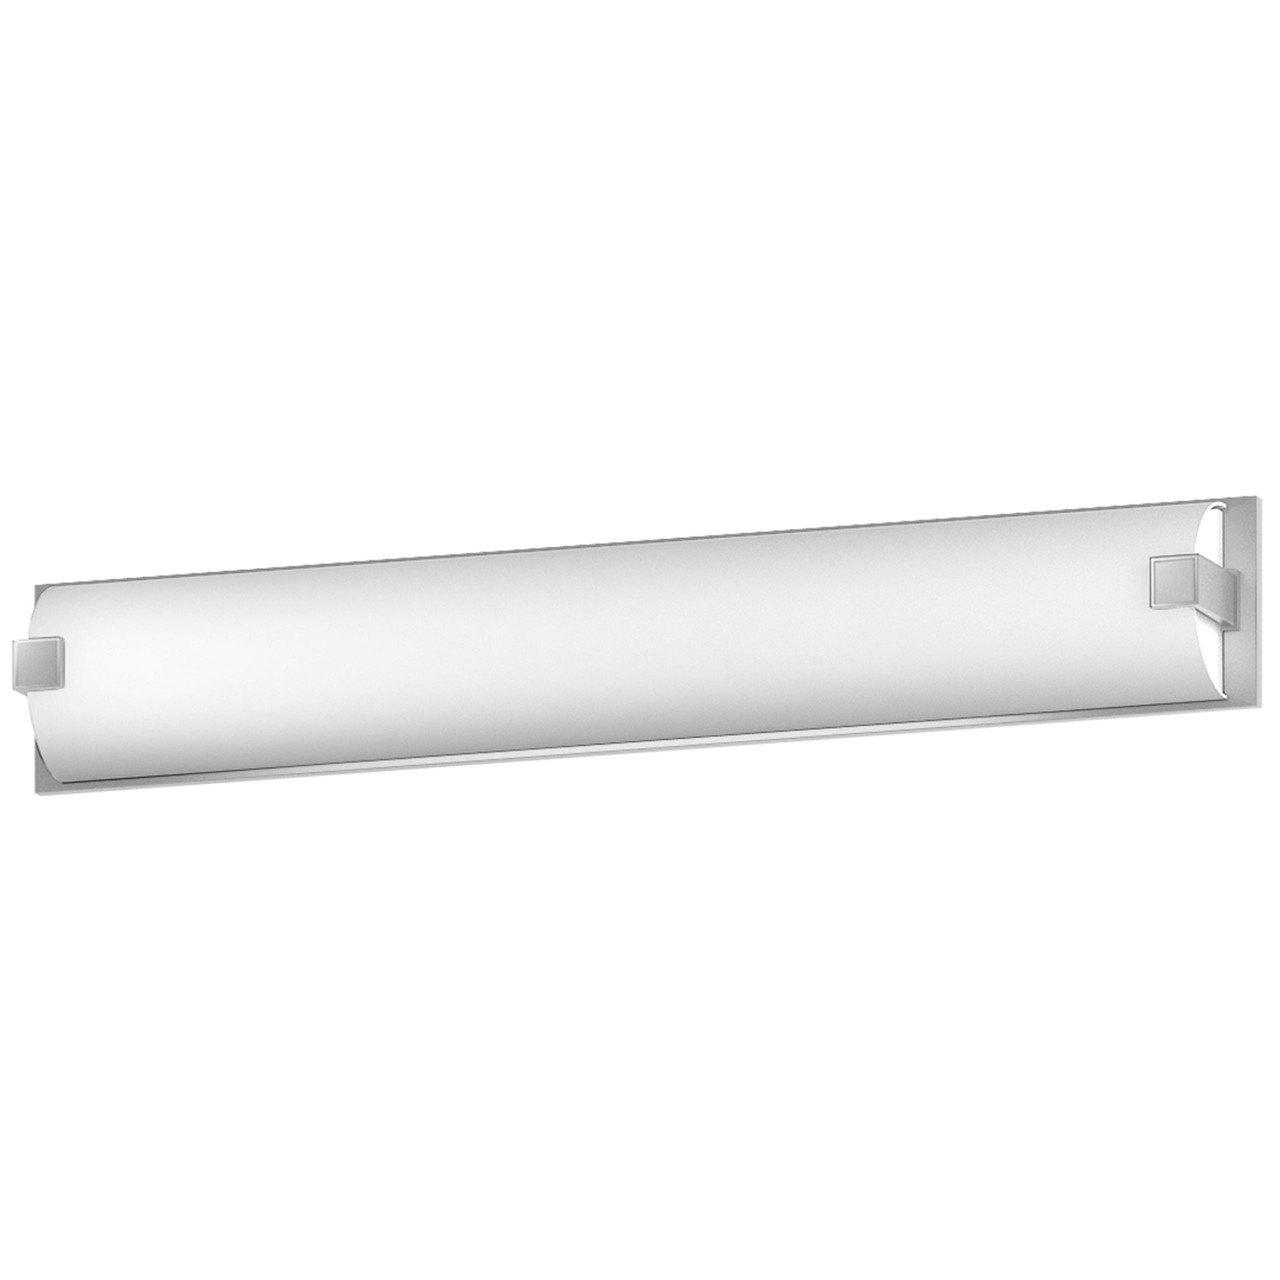 38"W Satin Nickel Vanity Light with Frosted Acrylic Shade